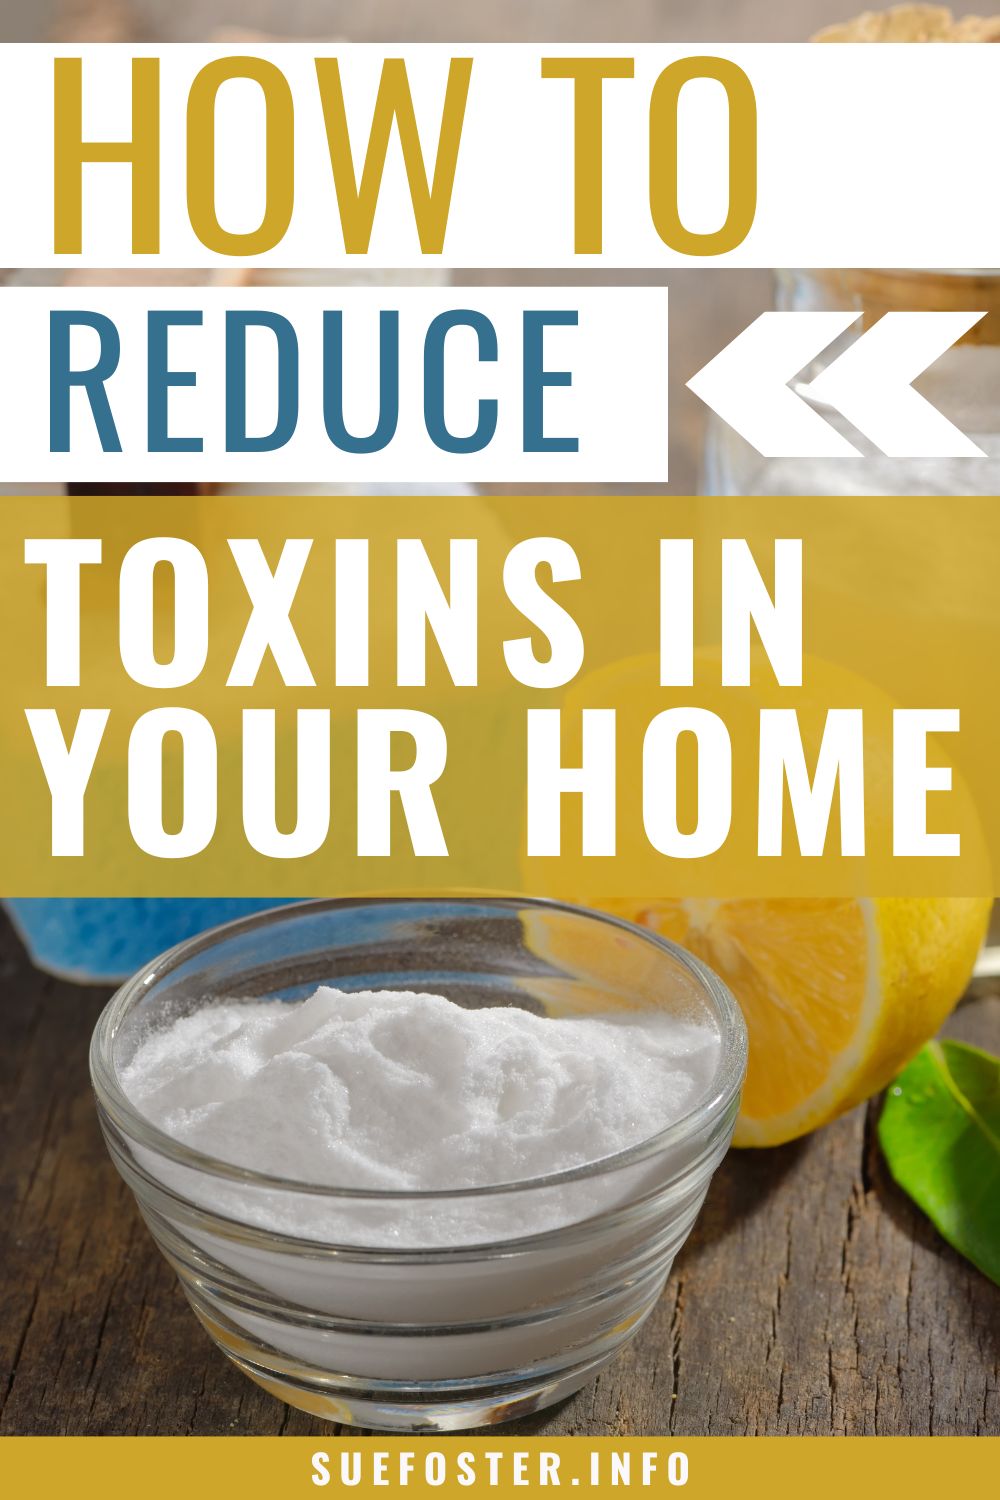 Reduce toxins in your home by using healthy alternatives to harsh, abrasive, and toxic fume-ridden cleaners.